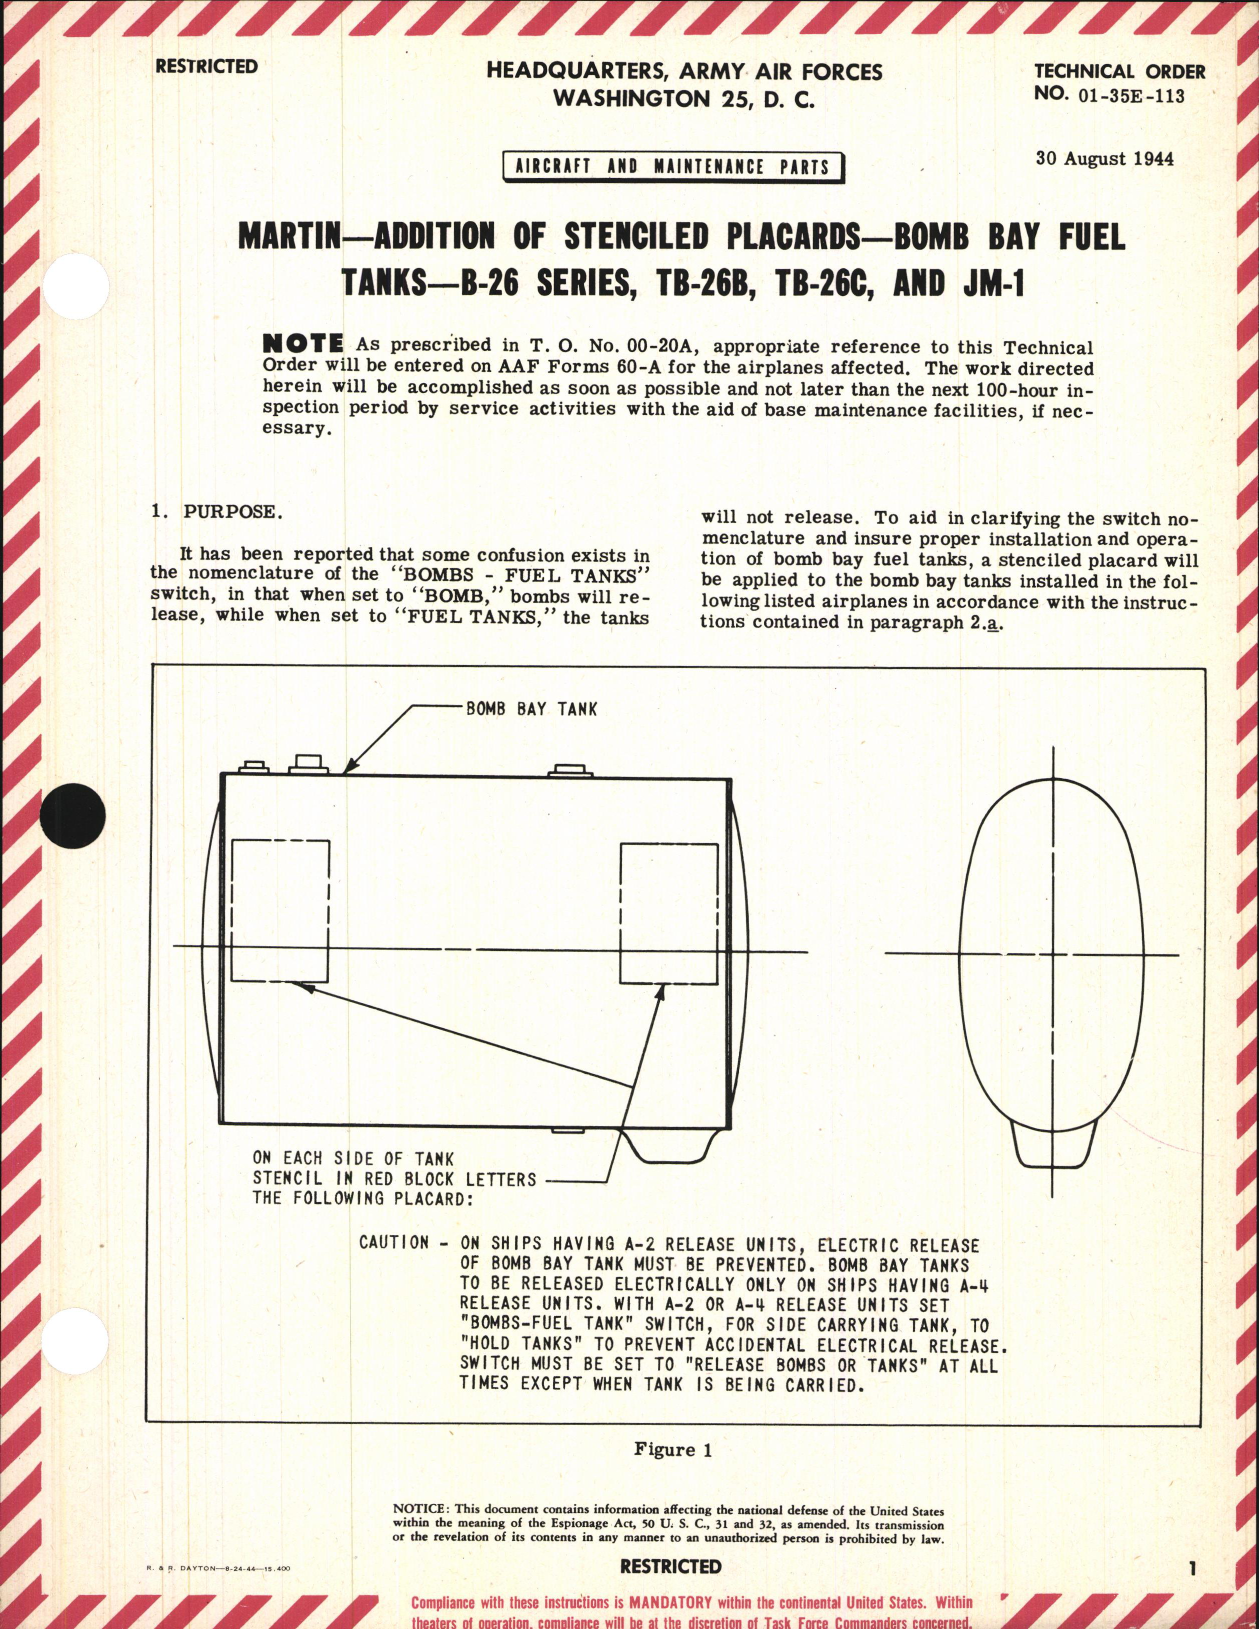 Sample page 1 from AirCorps Library document: Addition of Stenciled Placards on Bomb Bay Fuel Tanks for B-26 Series, TB-26B, TB-26C, and JM-1